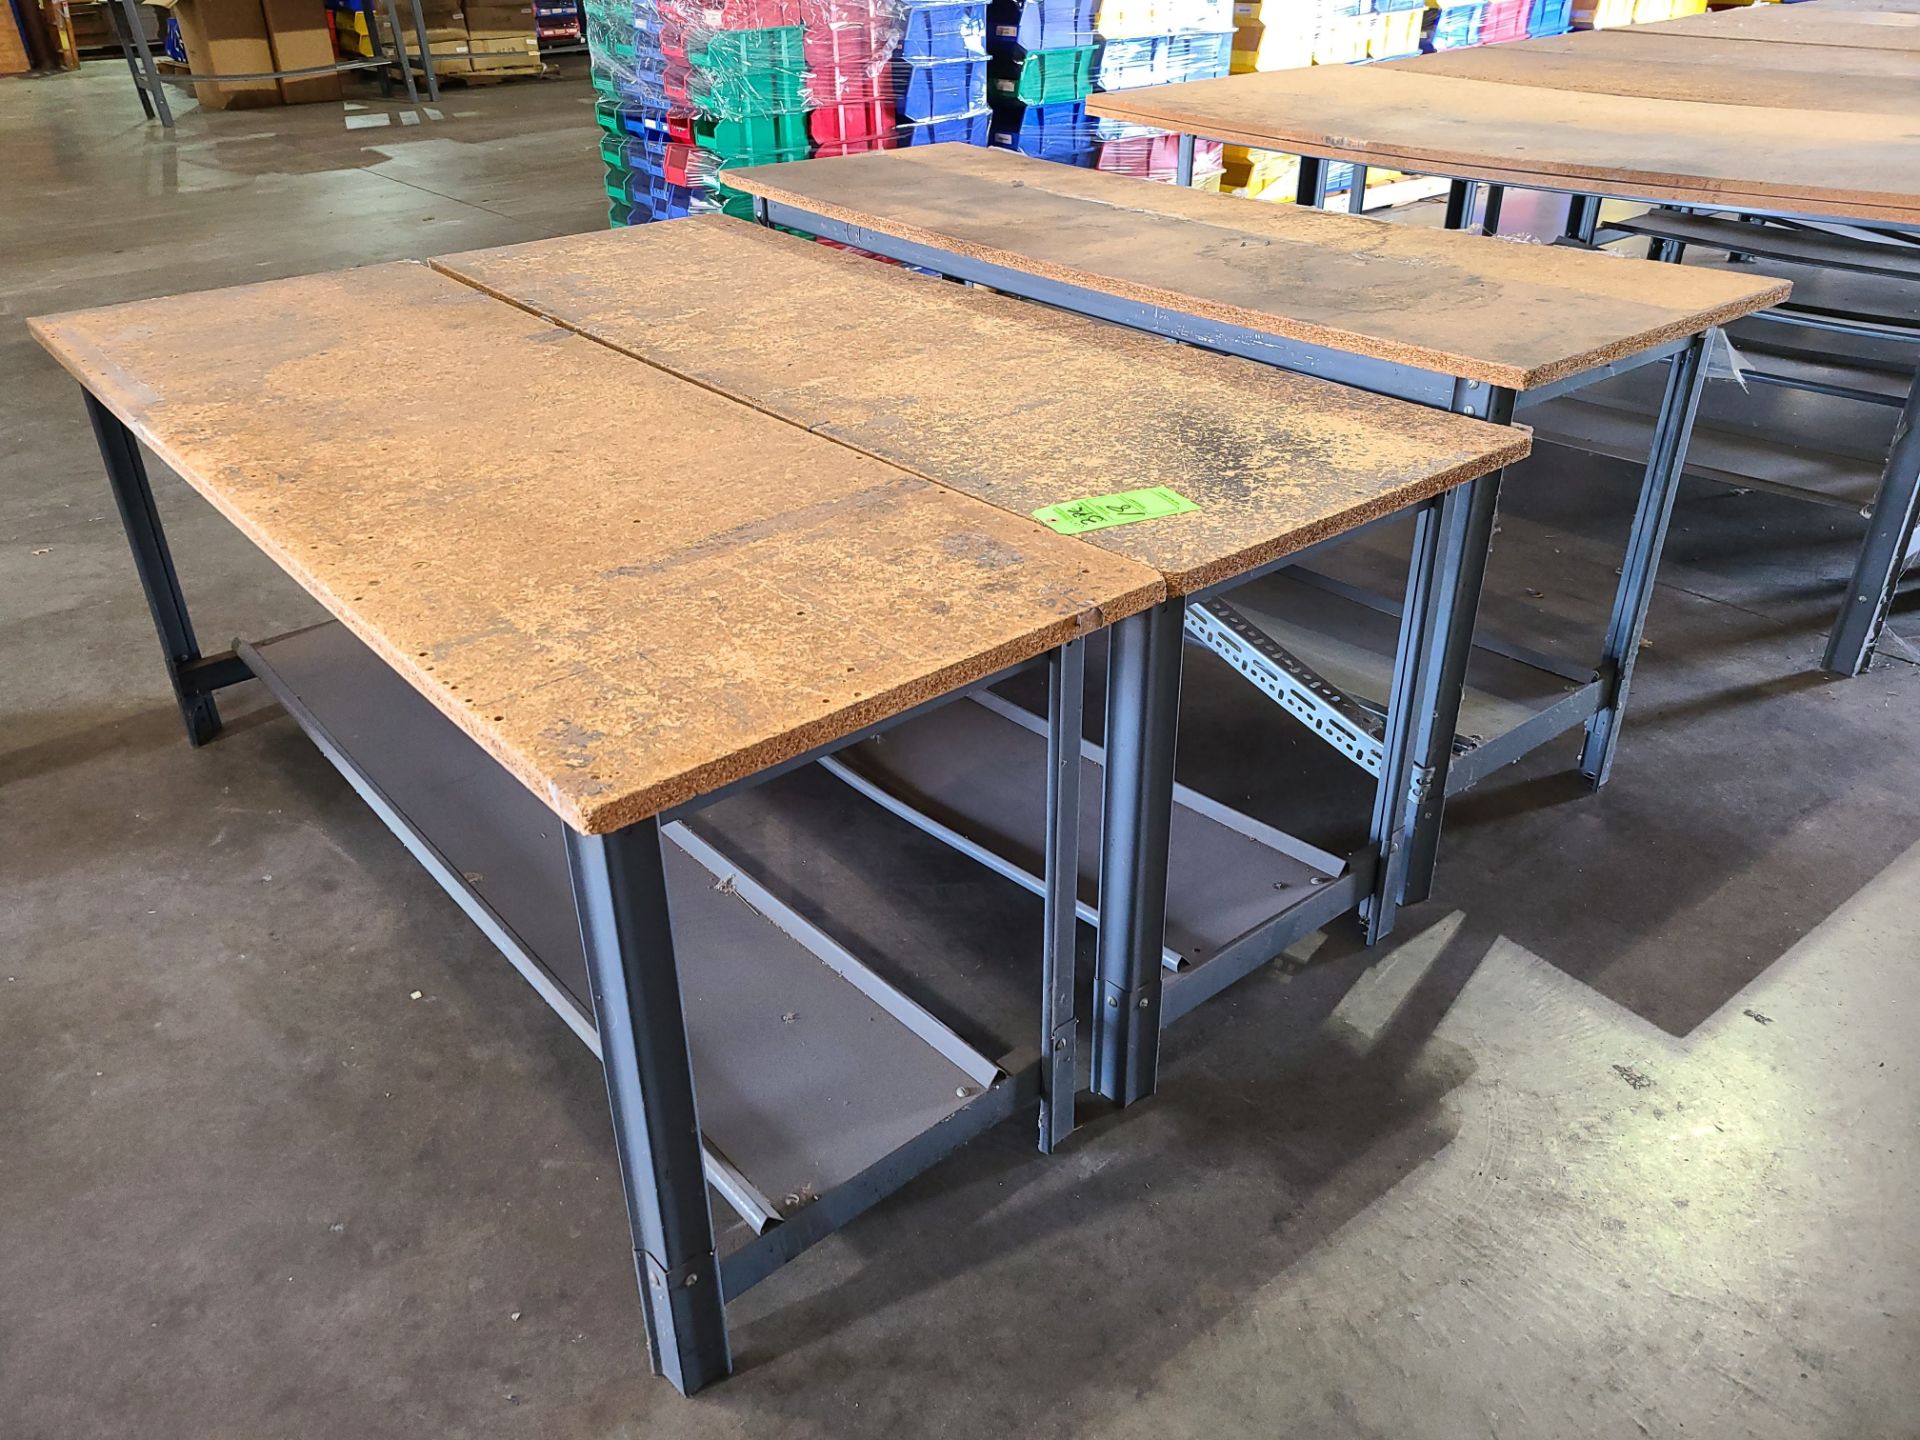 (3) STEEL TABLES WITH PARTICLE BOARD TOP 6'X2'